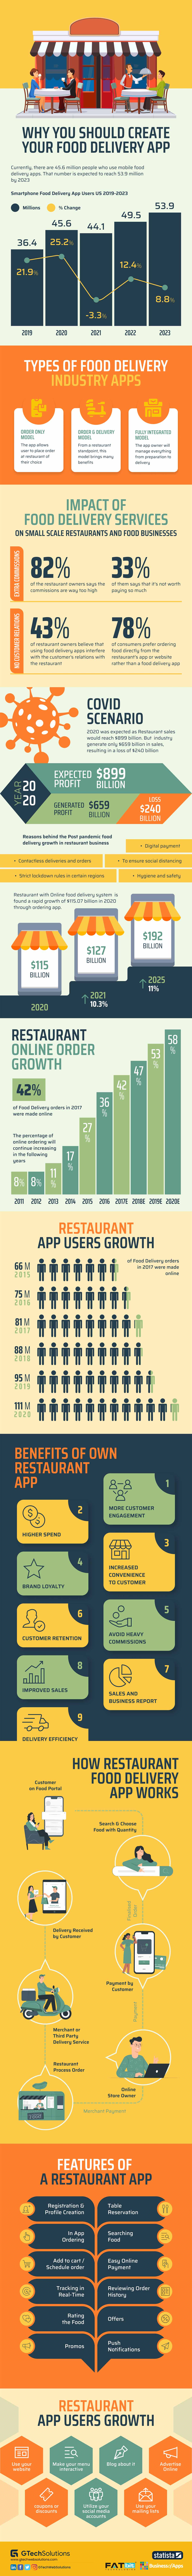 Why You Should Build a Food Delivery App for Your Restaurant 